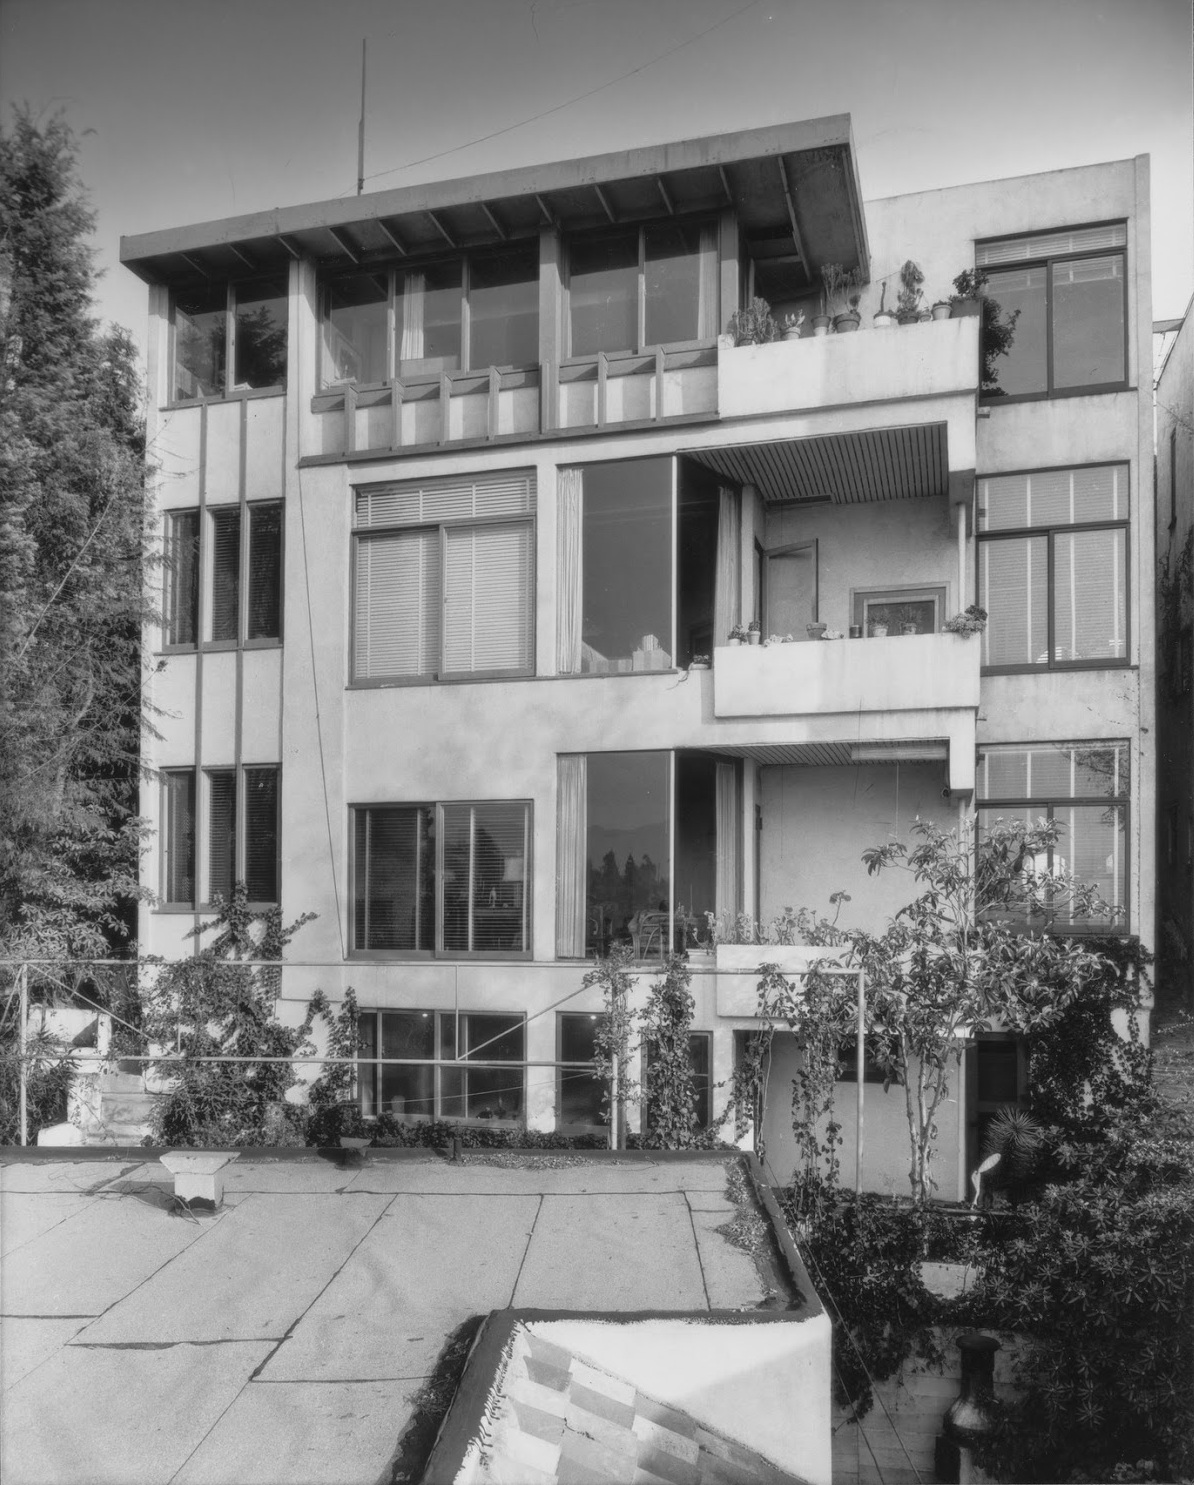 One of the five freestanding buildings at Manola Court, photographed by Julius Shulman in 1938. 